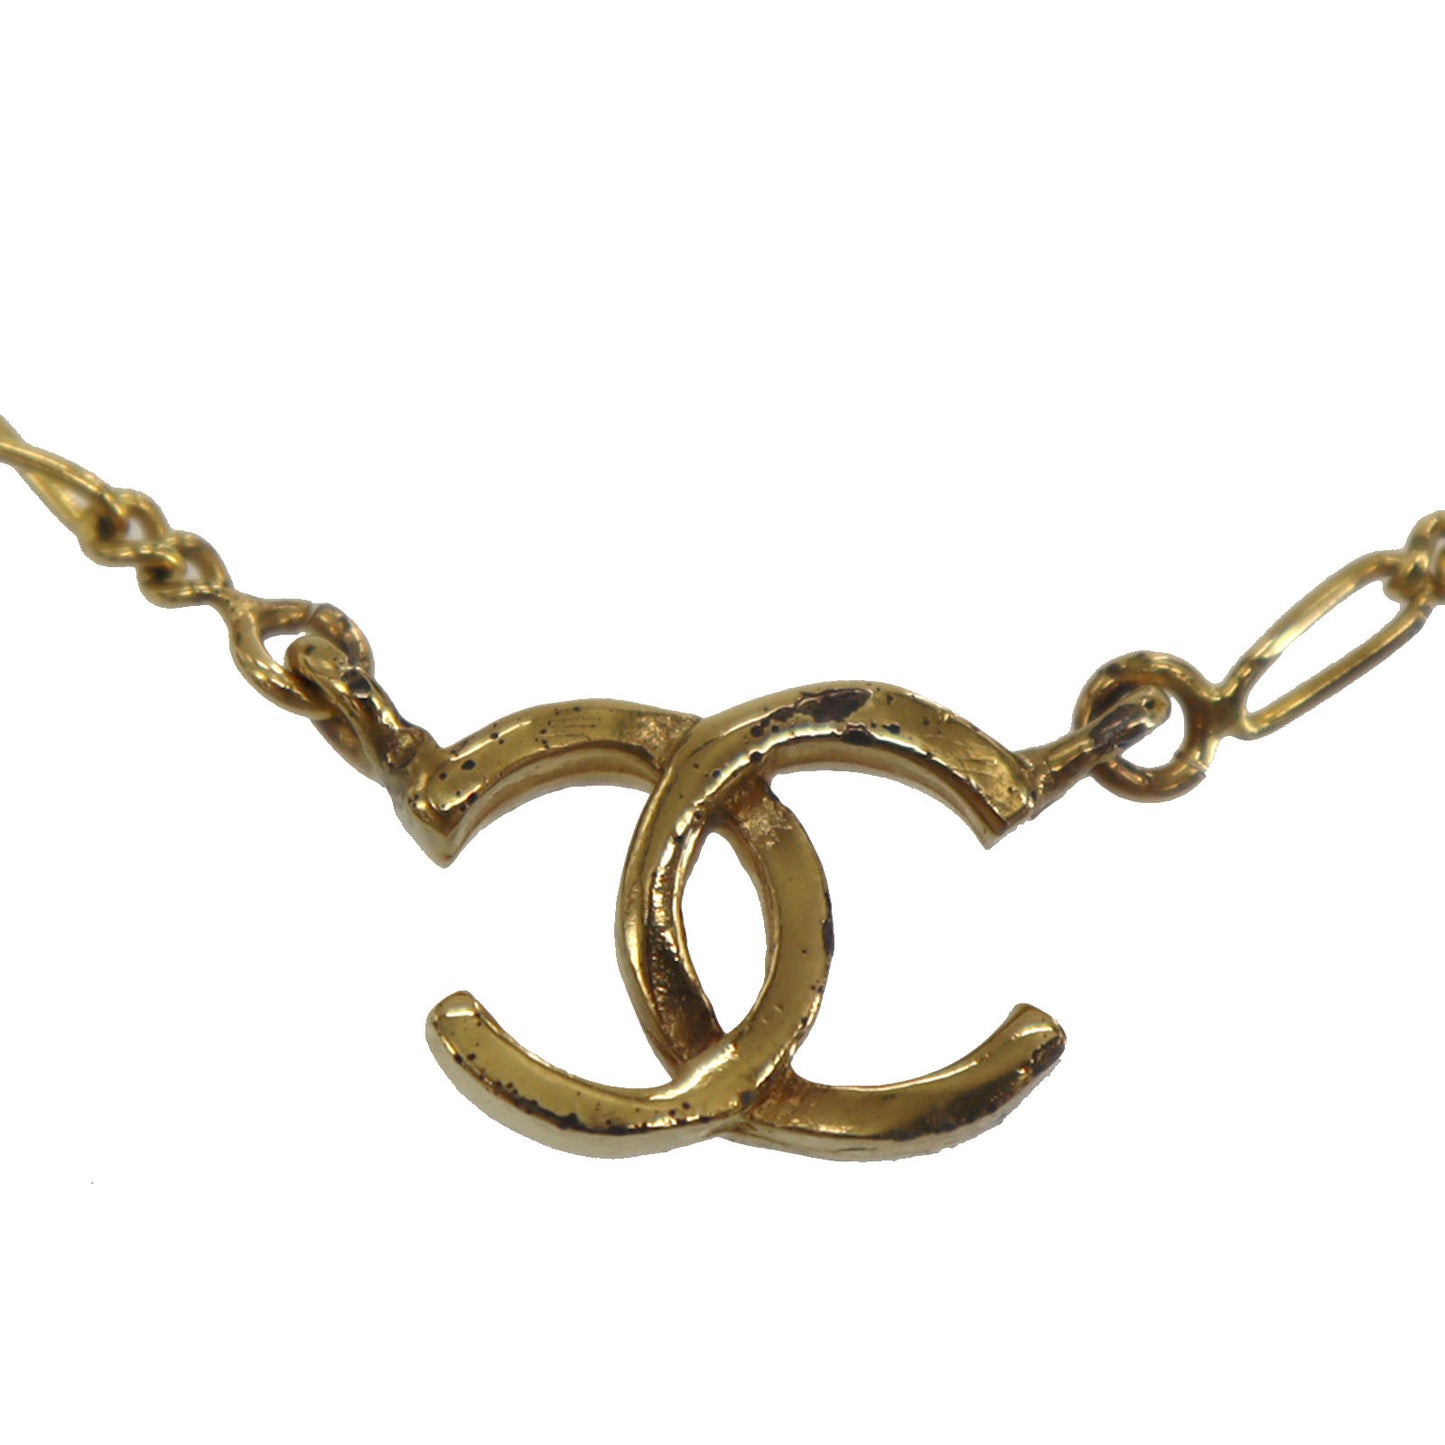 CHANEL CC Logos Necklace Pendant Gold-Plated 1982 #CG55